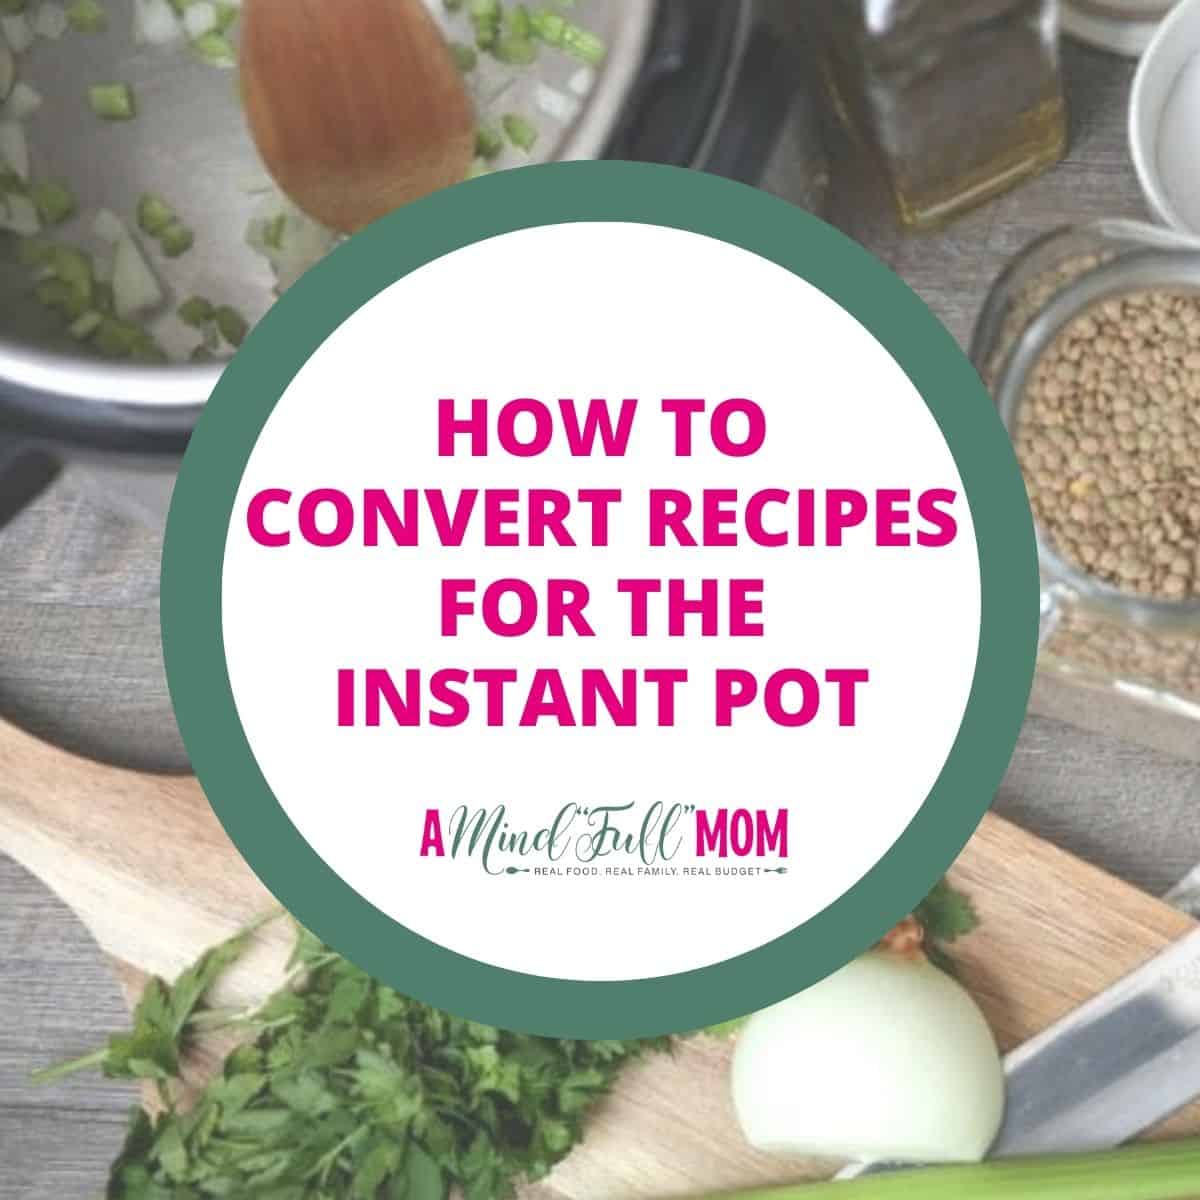 How to Halve Instant Pot Recipes (Instant Pot Recipes for Two